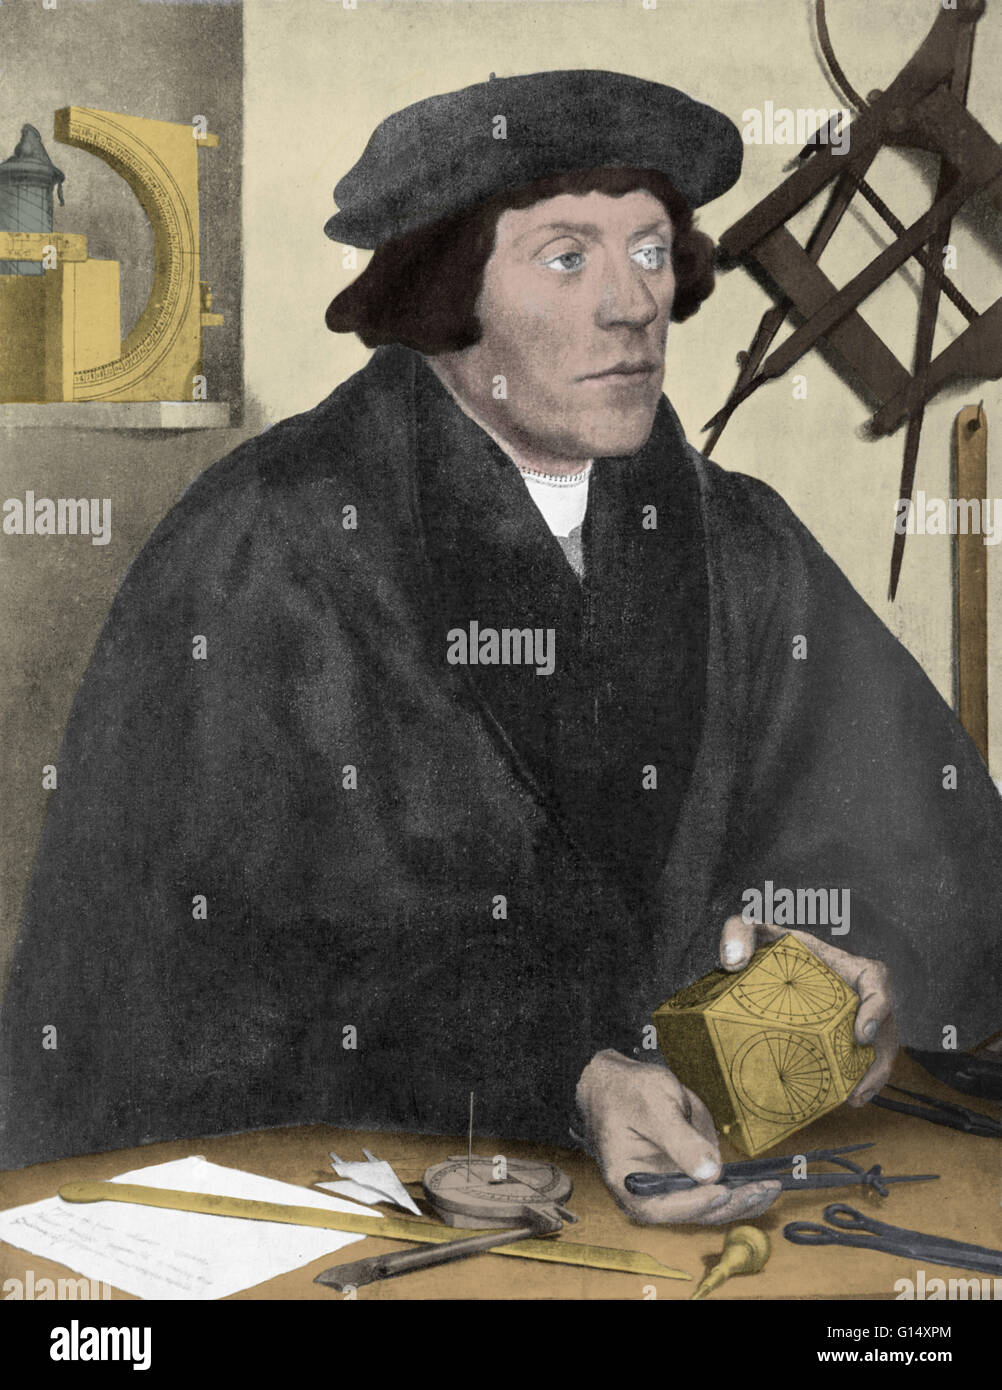 Nicholas Kratzer (1487 - 1550) was a German mathematician, astronomer, and horologist (the study of time). Kratzer came to England in 1516 and established himself as part of the artistic and scientific circle around Sir Thomas More. He tutored More's chil Stock Photo